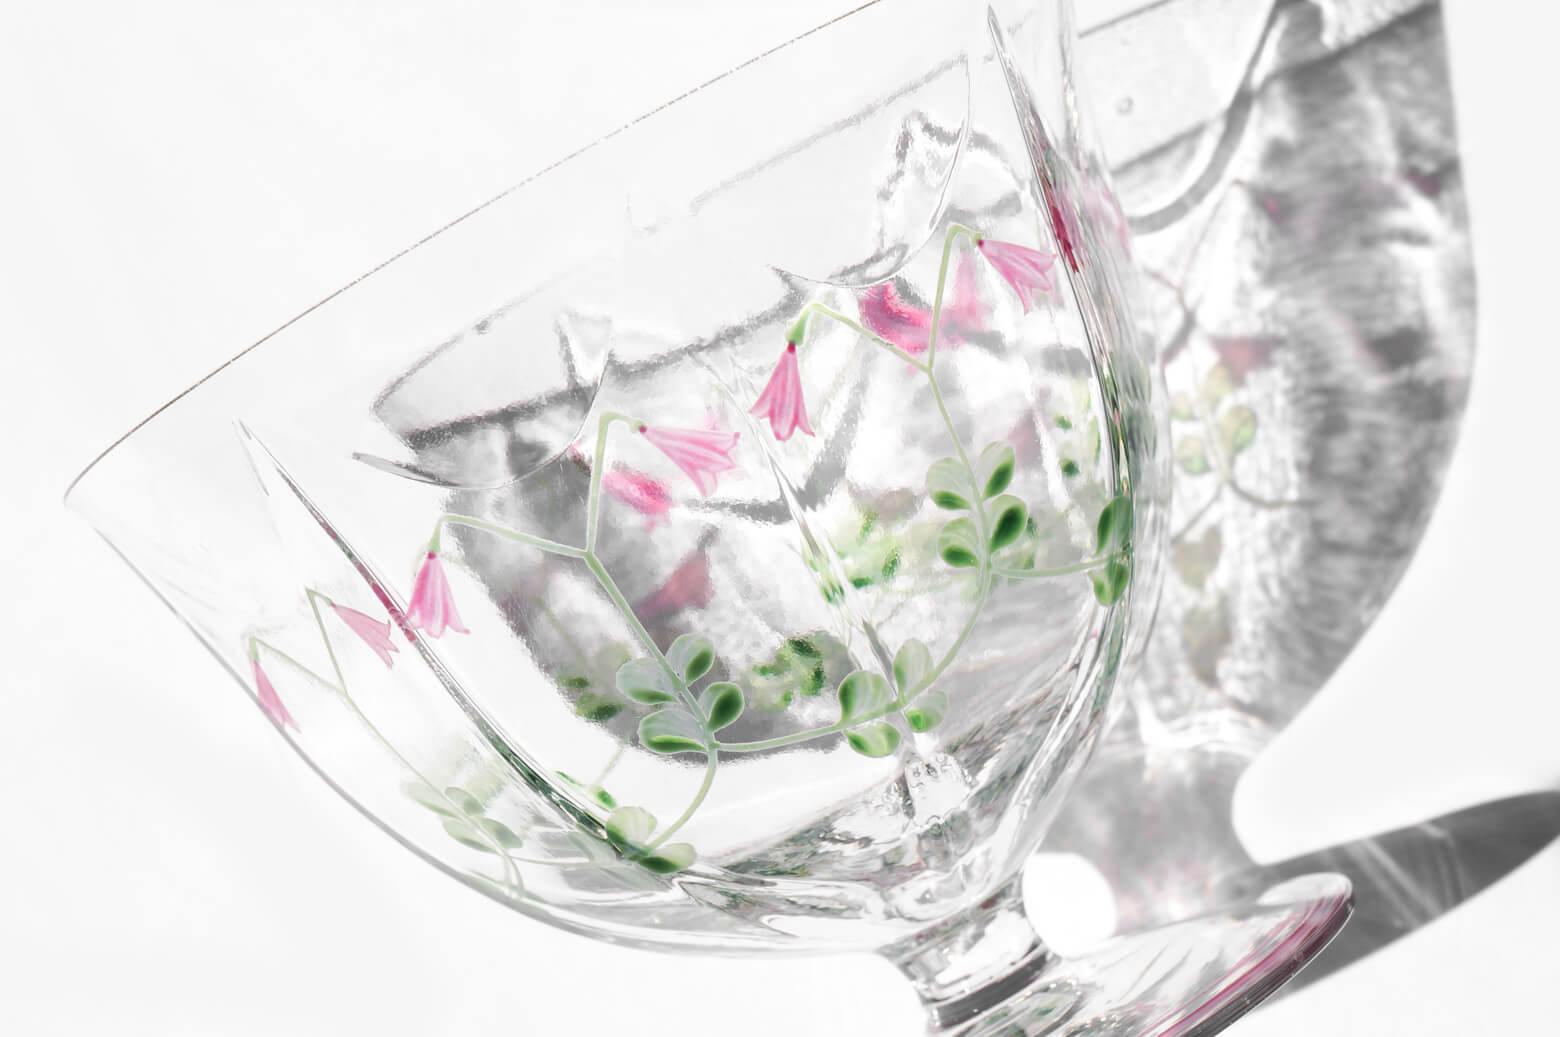 Orrefors Glass Compote Linnea Eva Englund/オレフォス グラス コンポート リネア エヴァ・イングランド スウェーデン ガラス 北欧食器